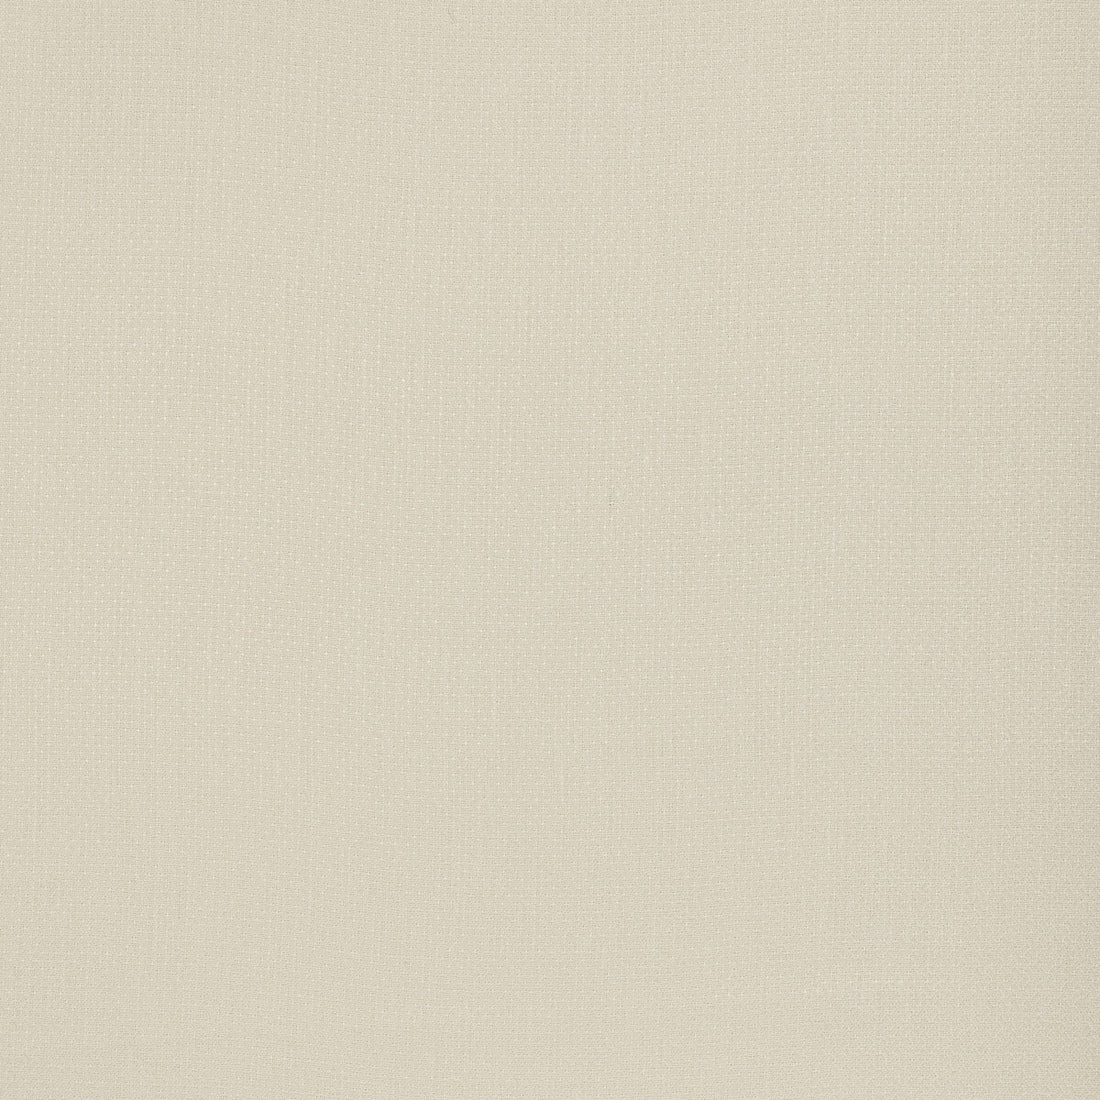 Strand fabric in ivory color - pattern ED85382.104.0 - by Threads in the Quintessential Naturals collection